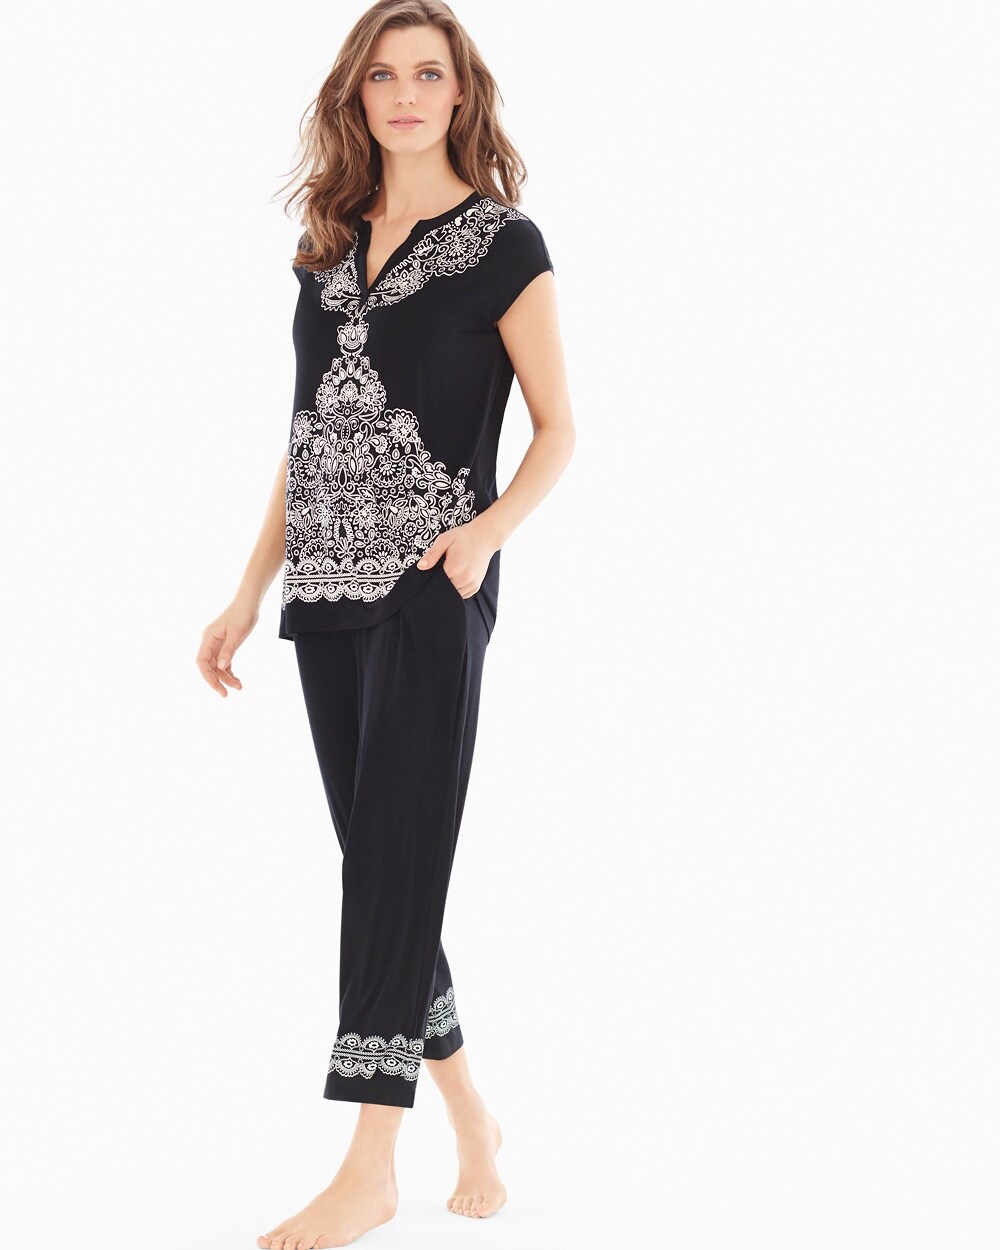 Pop Over Pajama Top Delft Black Placement - Soma